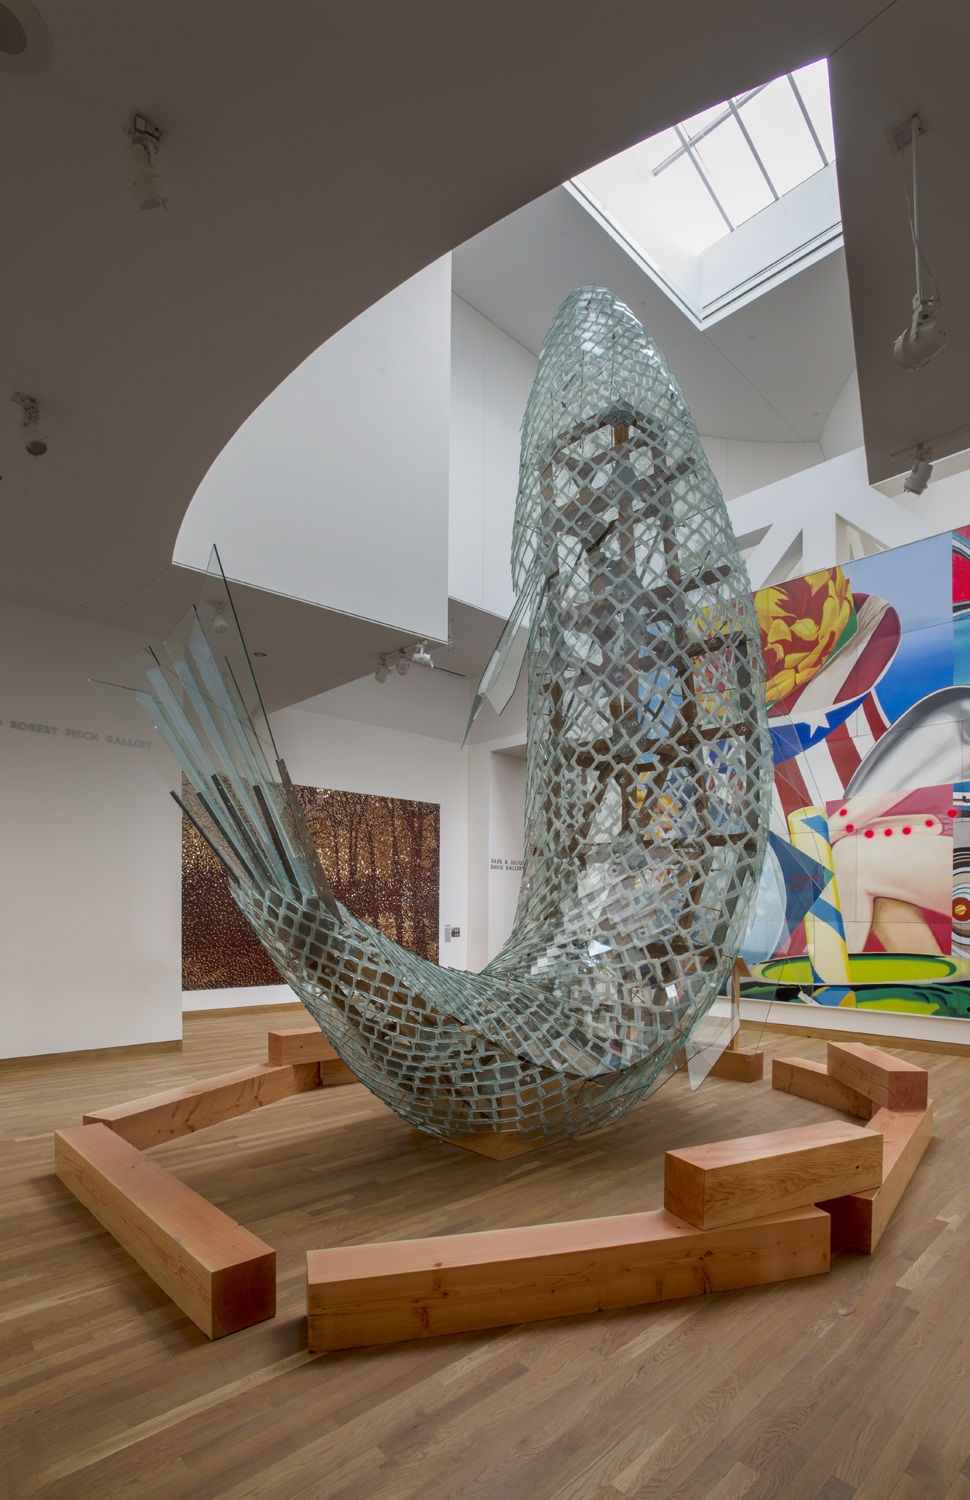 Frank Gehry, Standing Glass Fish, 1986, installed in the Weisman Museum at the University of Minnesota. Photo: Rik Sferra, February 15, 2016.